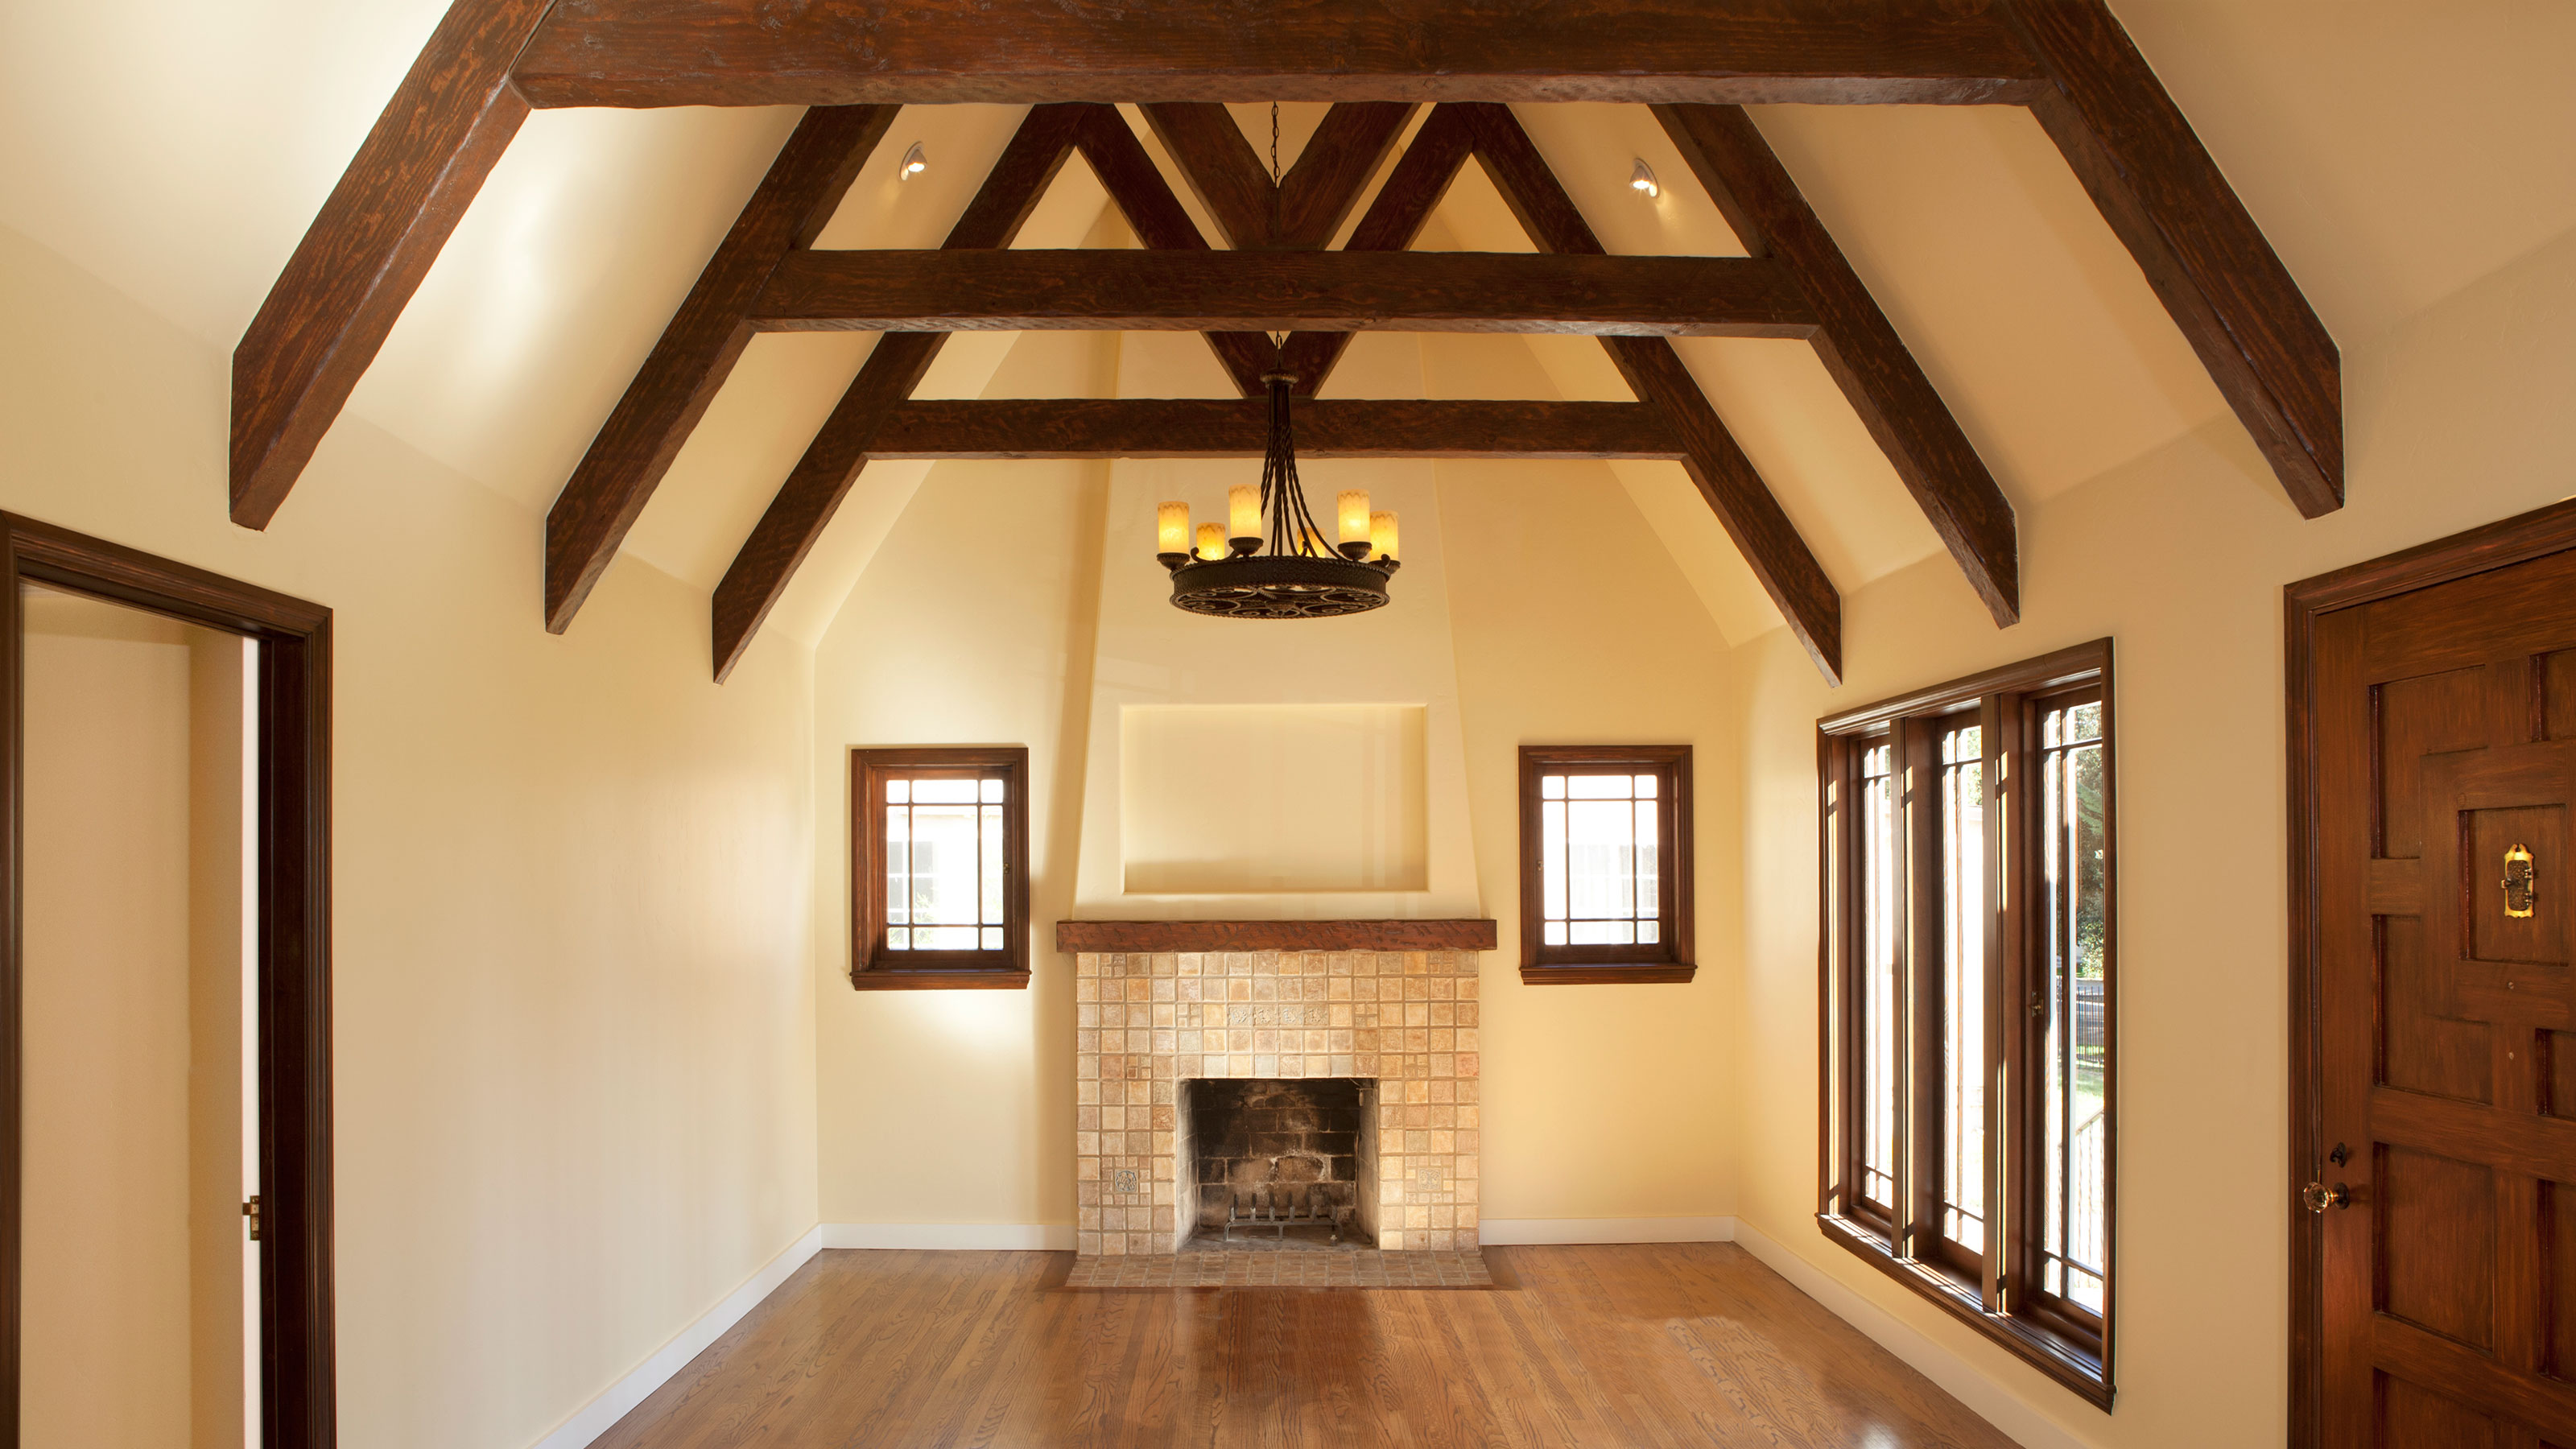 Vaulted Ceilings Costs And Design Considerations Real Homes